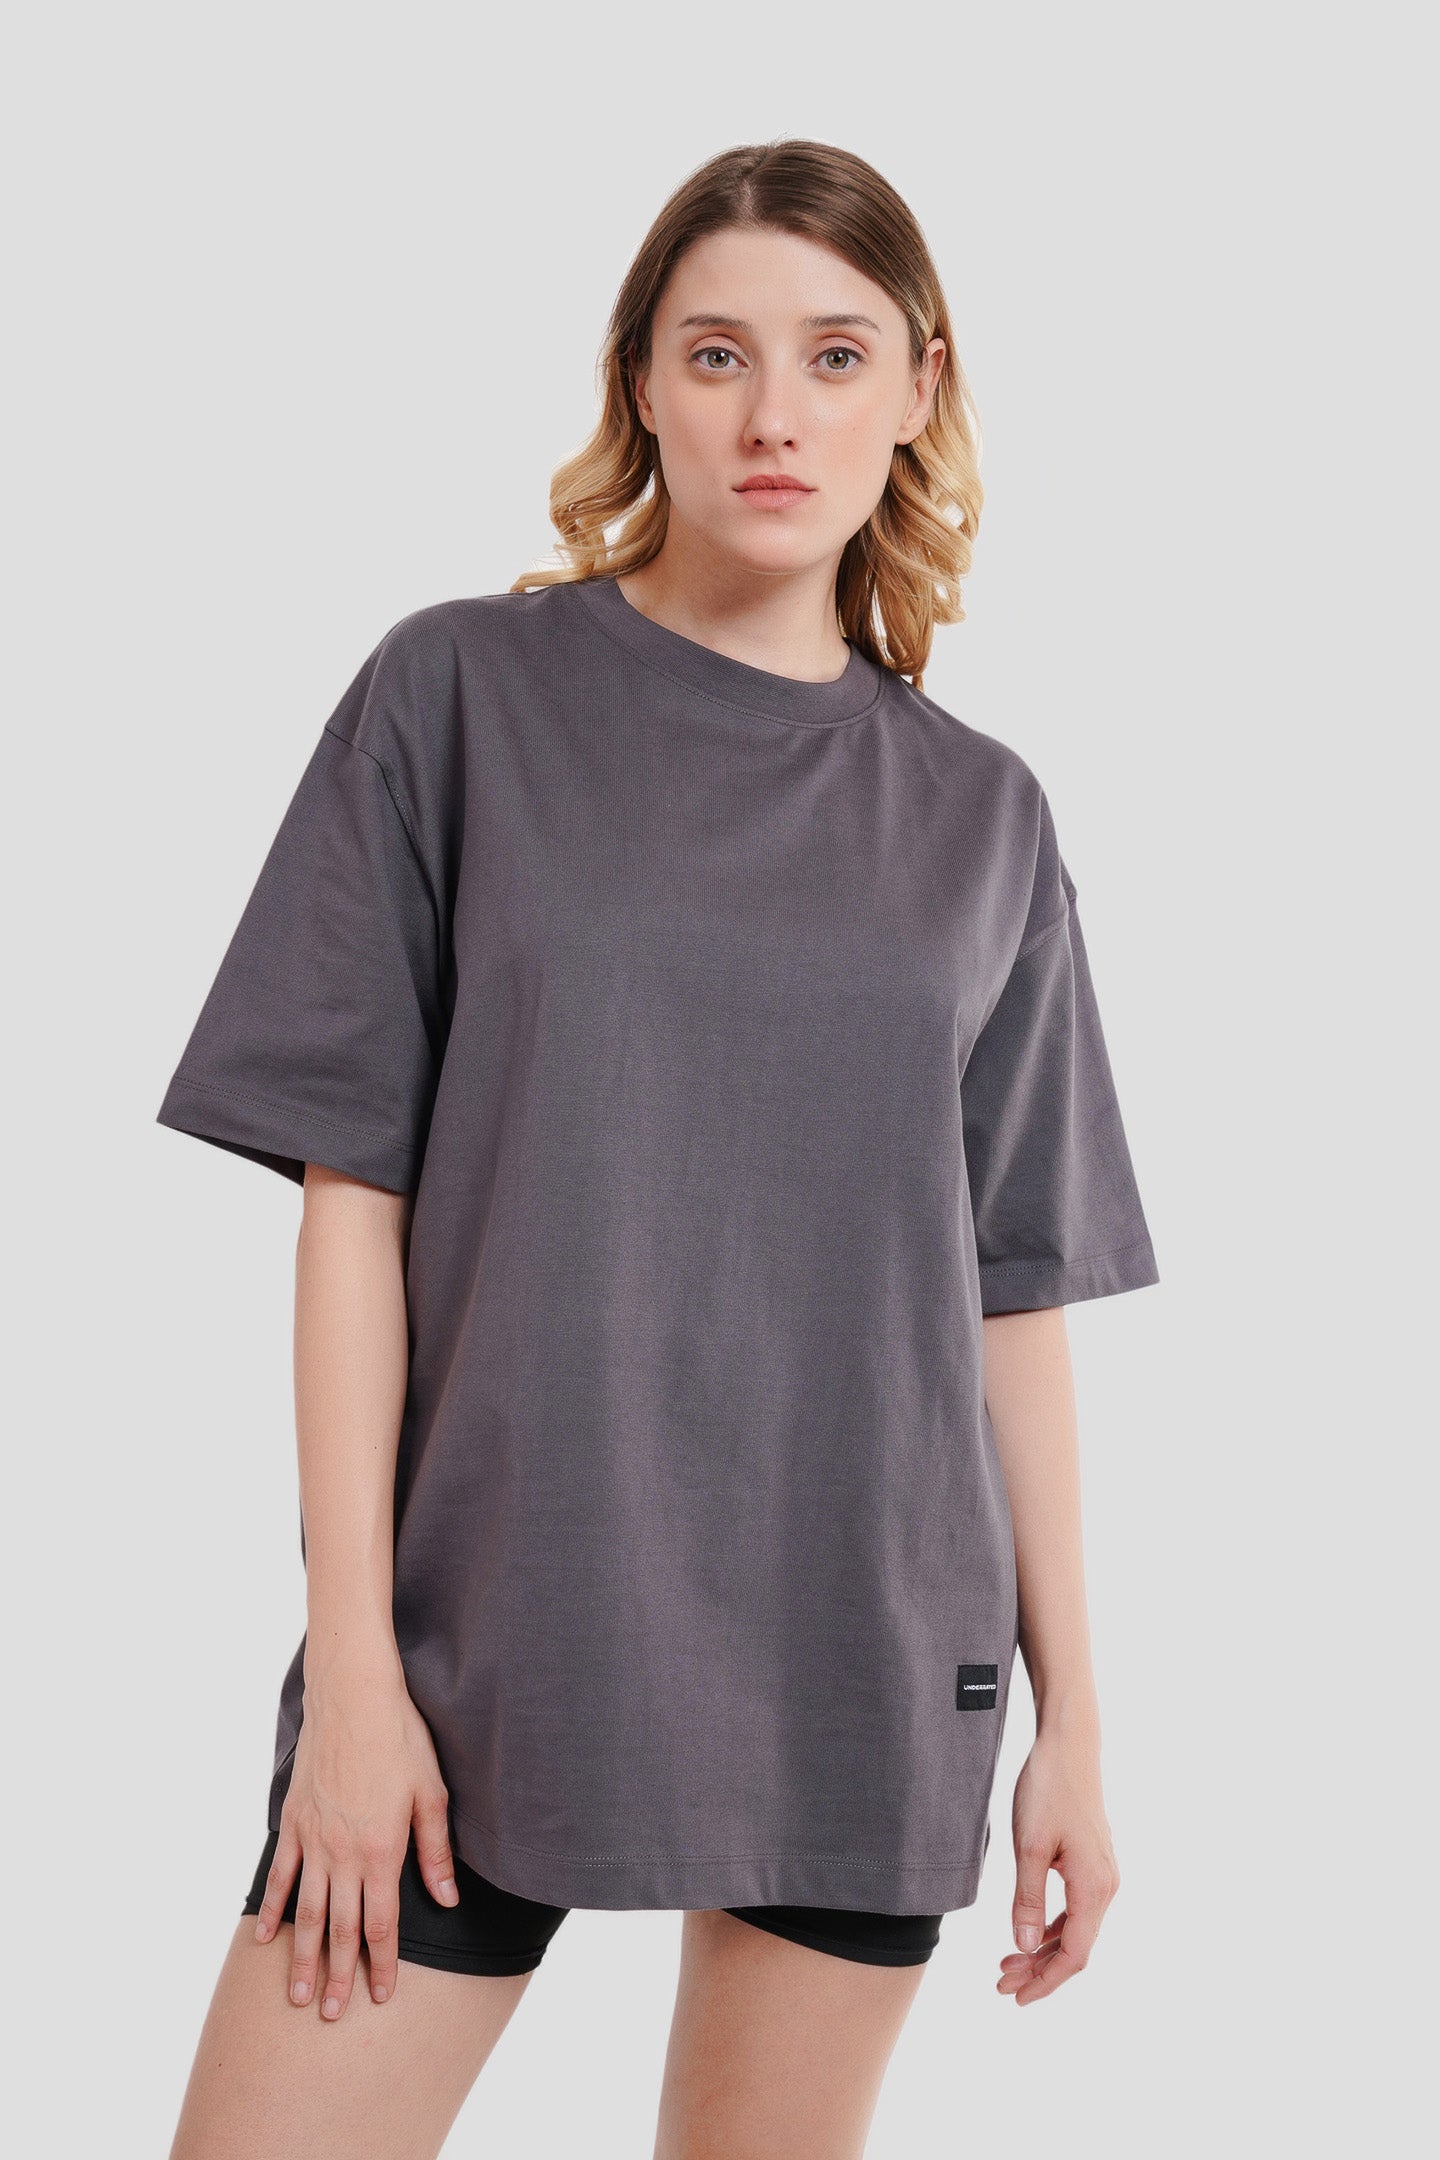 Pray For The Real Dark Grey Printed T Shirt Women Oversized Fit Pic 2